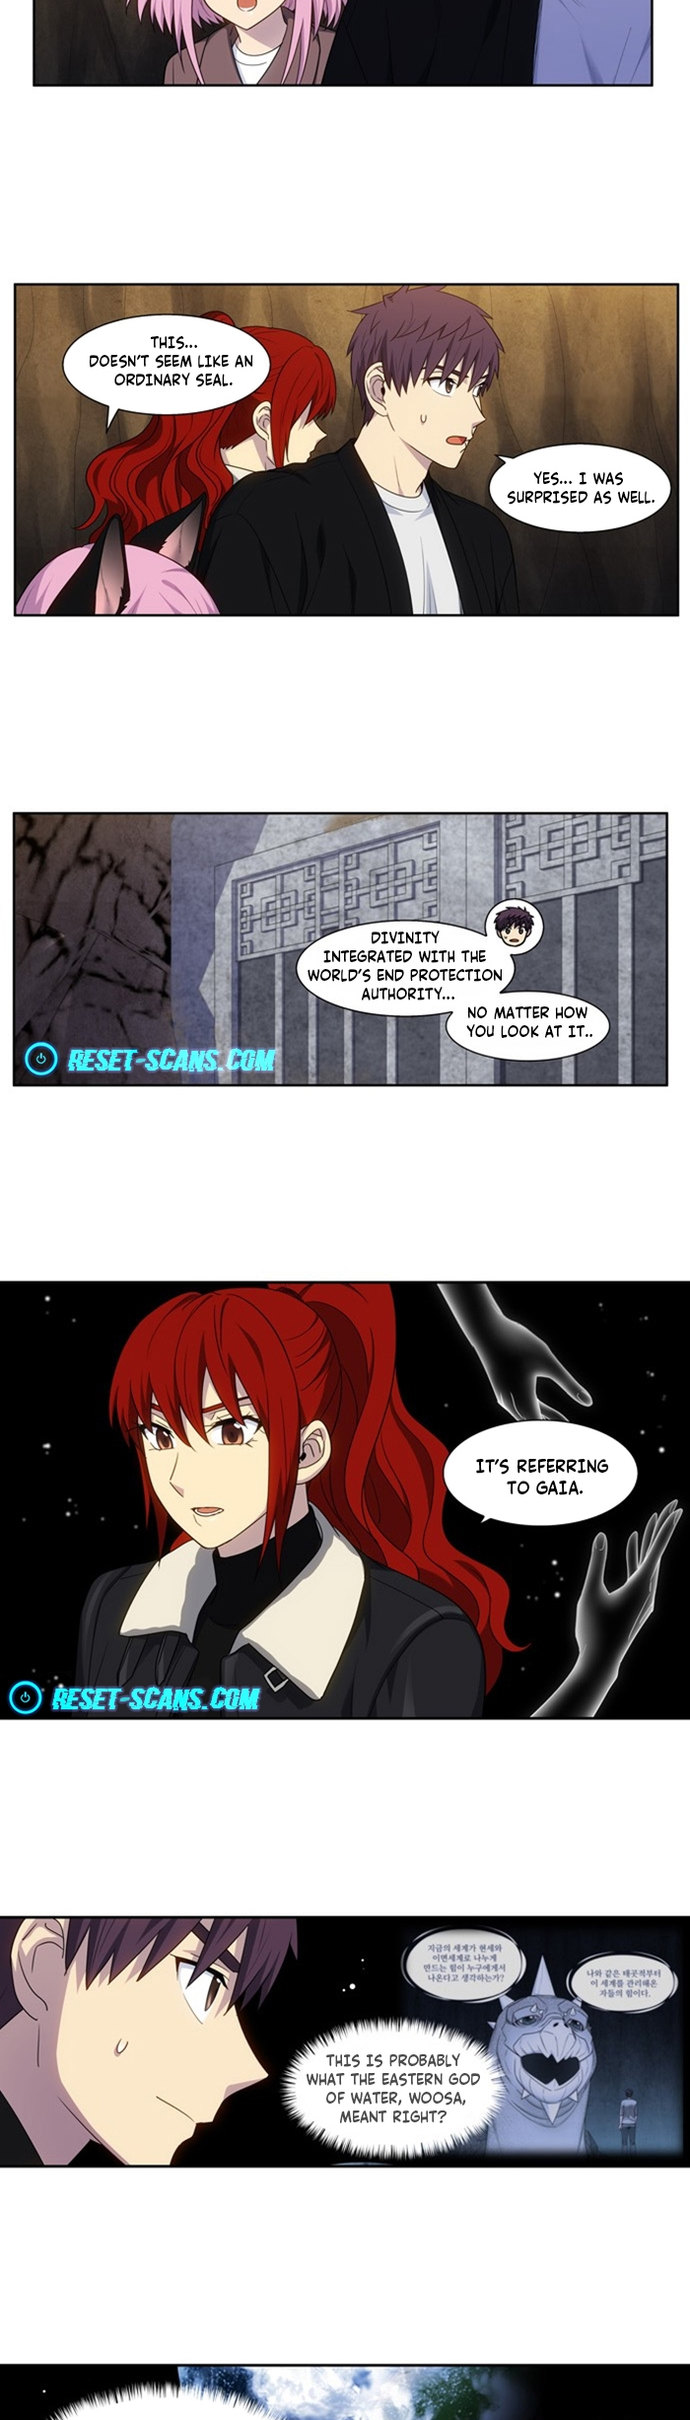 The Gamer - Chapter 409 Page 13